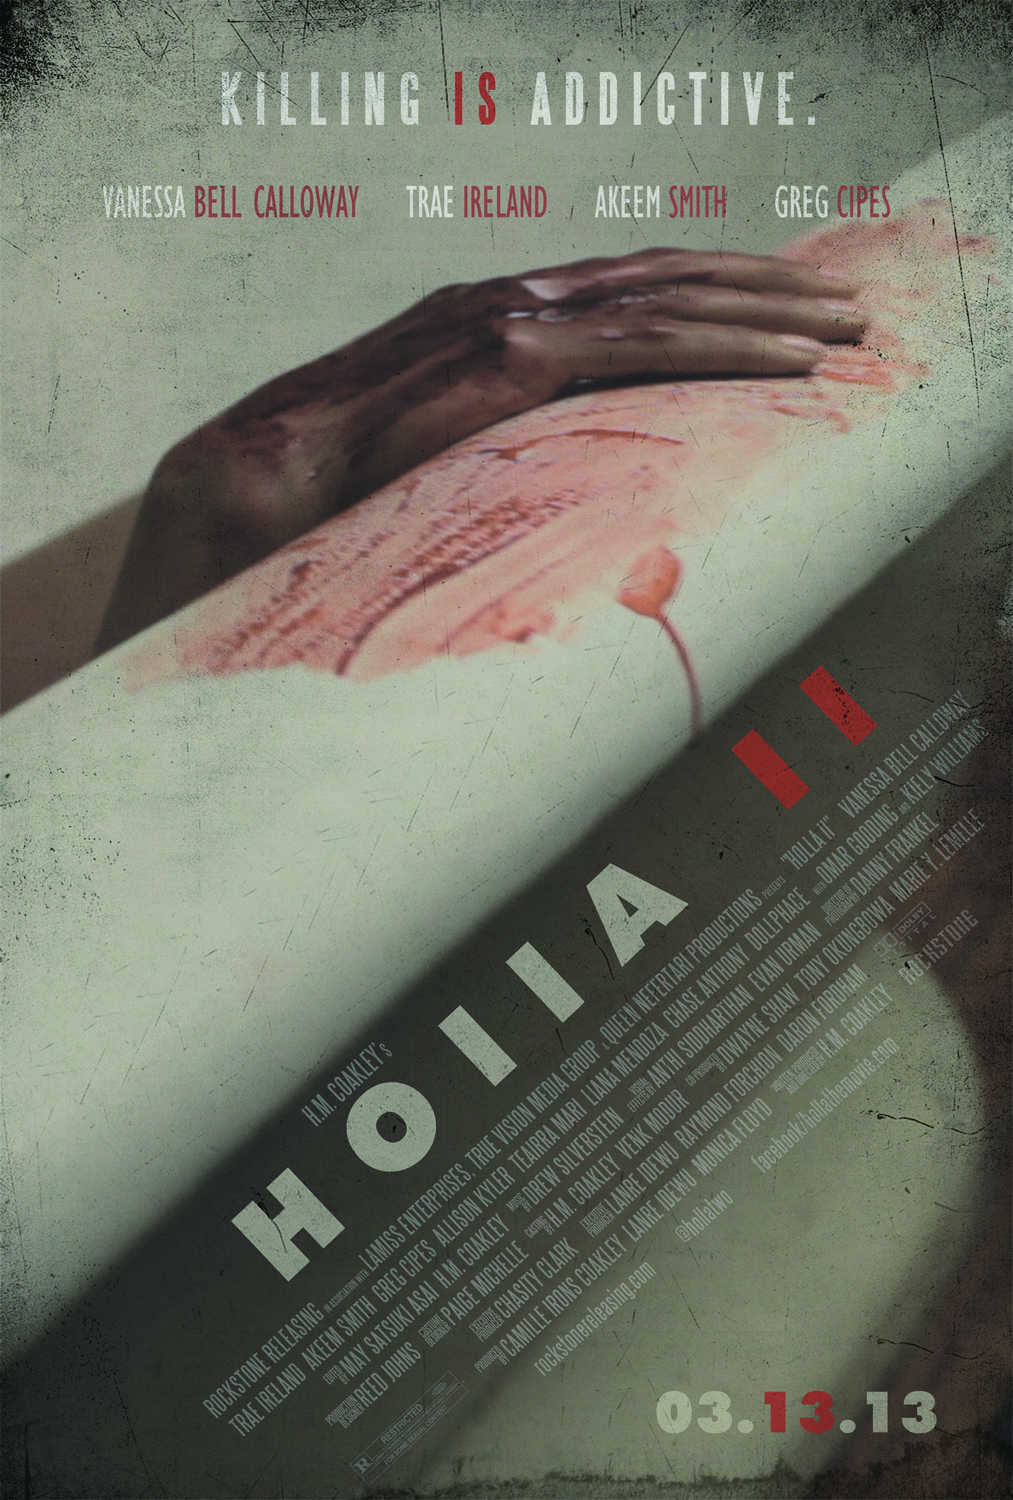 H.M. Coakley's Holla II, an urban horror/comedy, premiered at the 2013 21st Annual Pan African Film Festival in Los Angeles on Feb 8 at Rave Cinema Baldwin Hills.